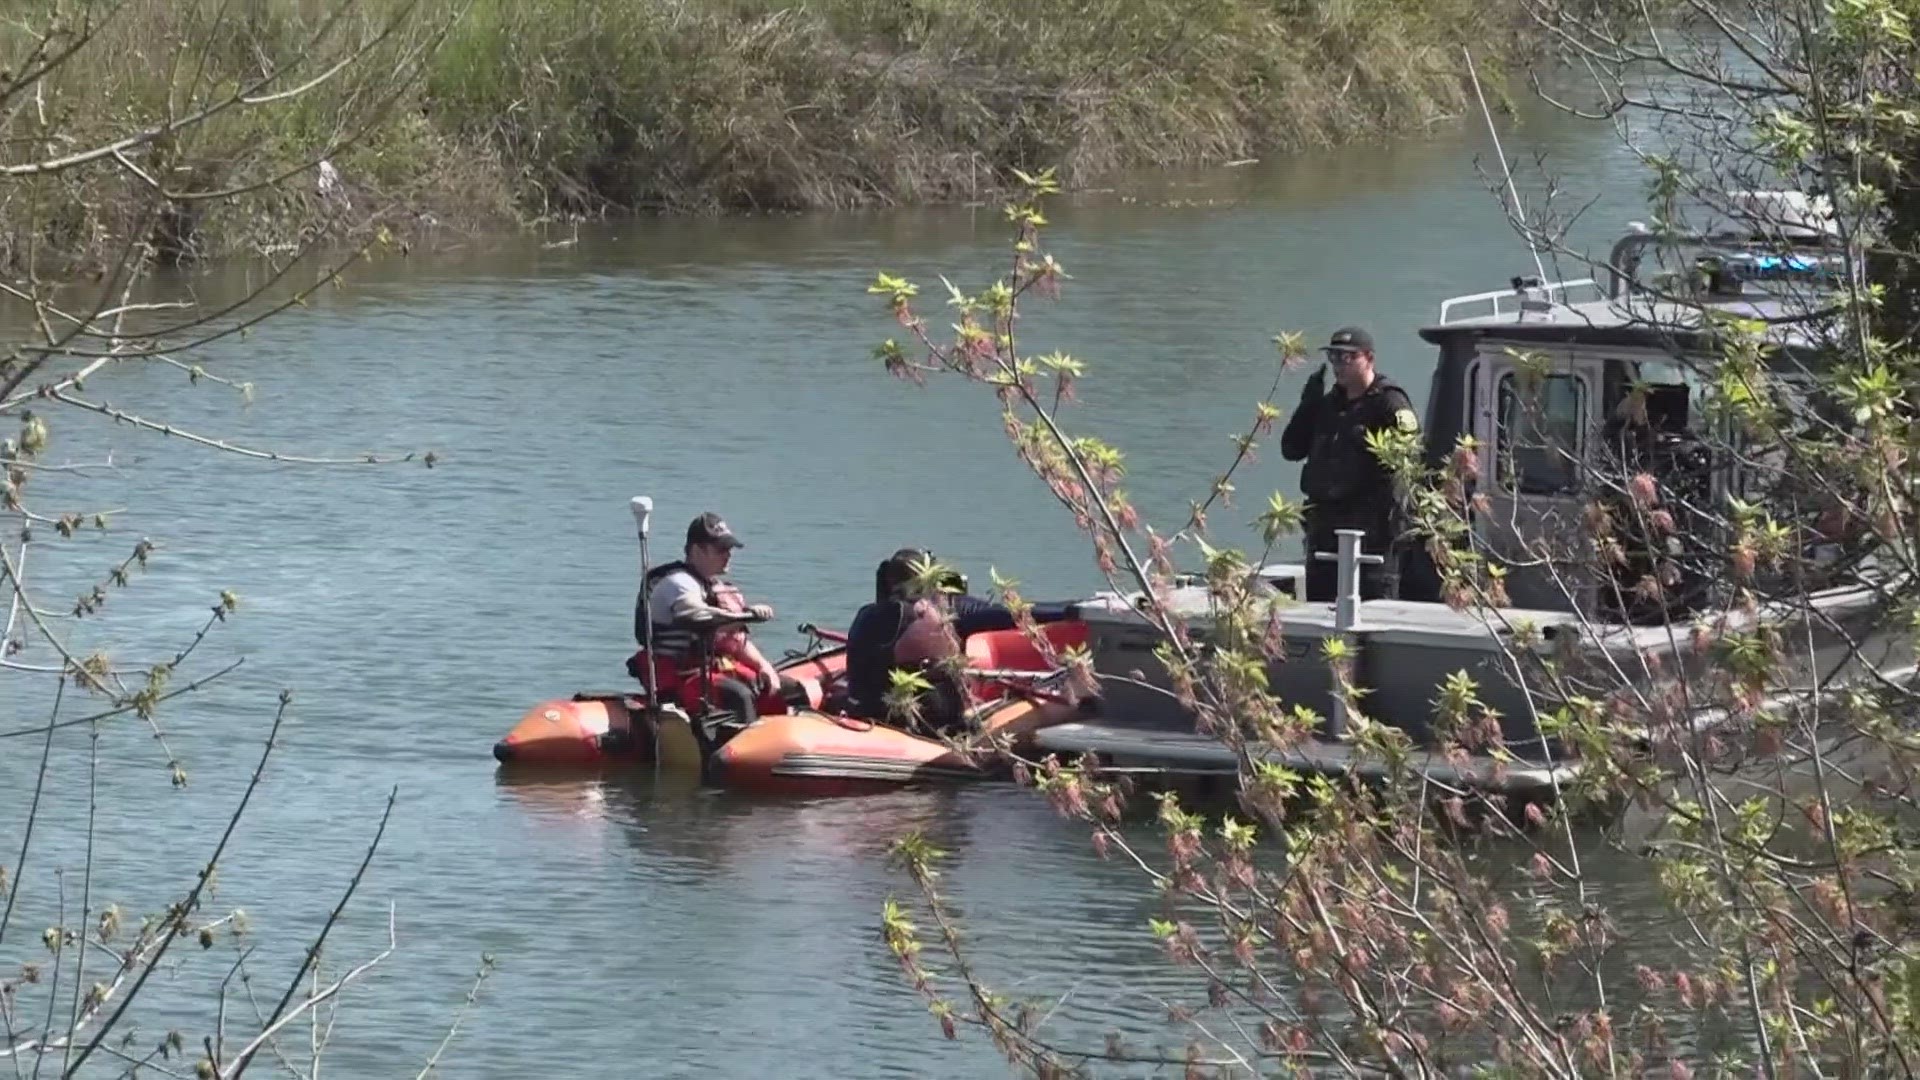 Crews have been searching for a missing Stagg High School teenager after they jumped into the Calaveras River but never resurfaced.